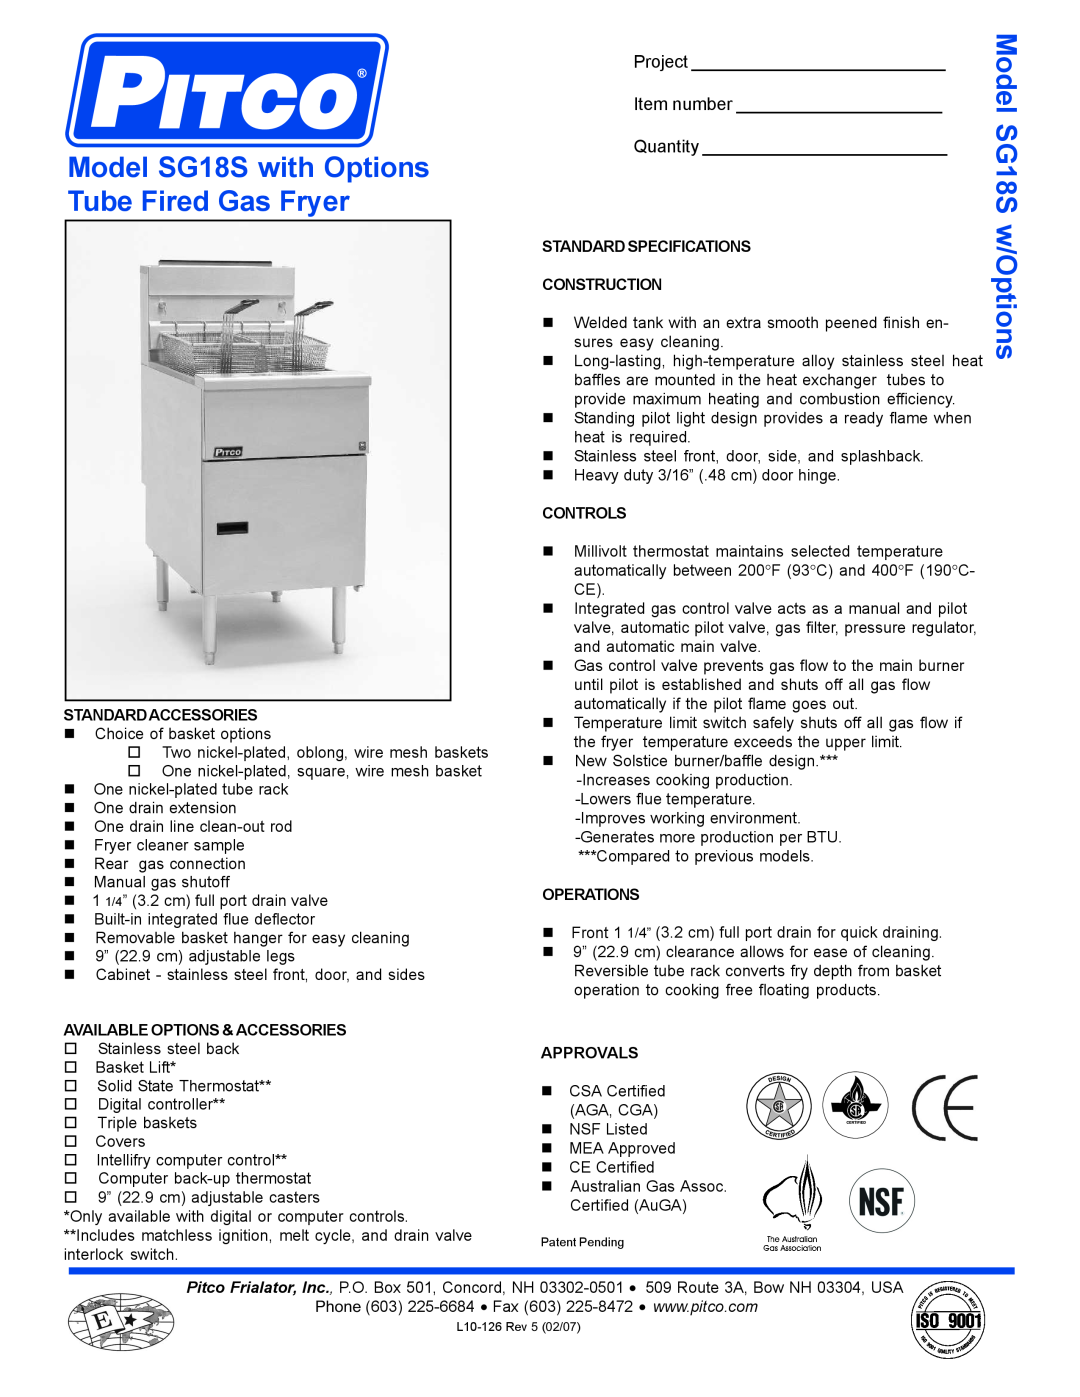 Pitco Frialator specifications Model SG18S with Options Tube Fired Gas Fryer, Model SG18S w/Options, Project, Controls 